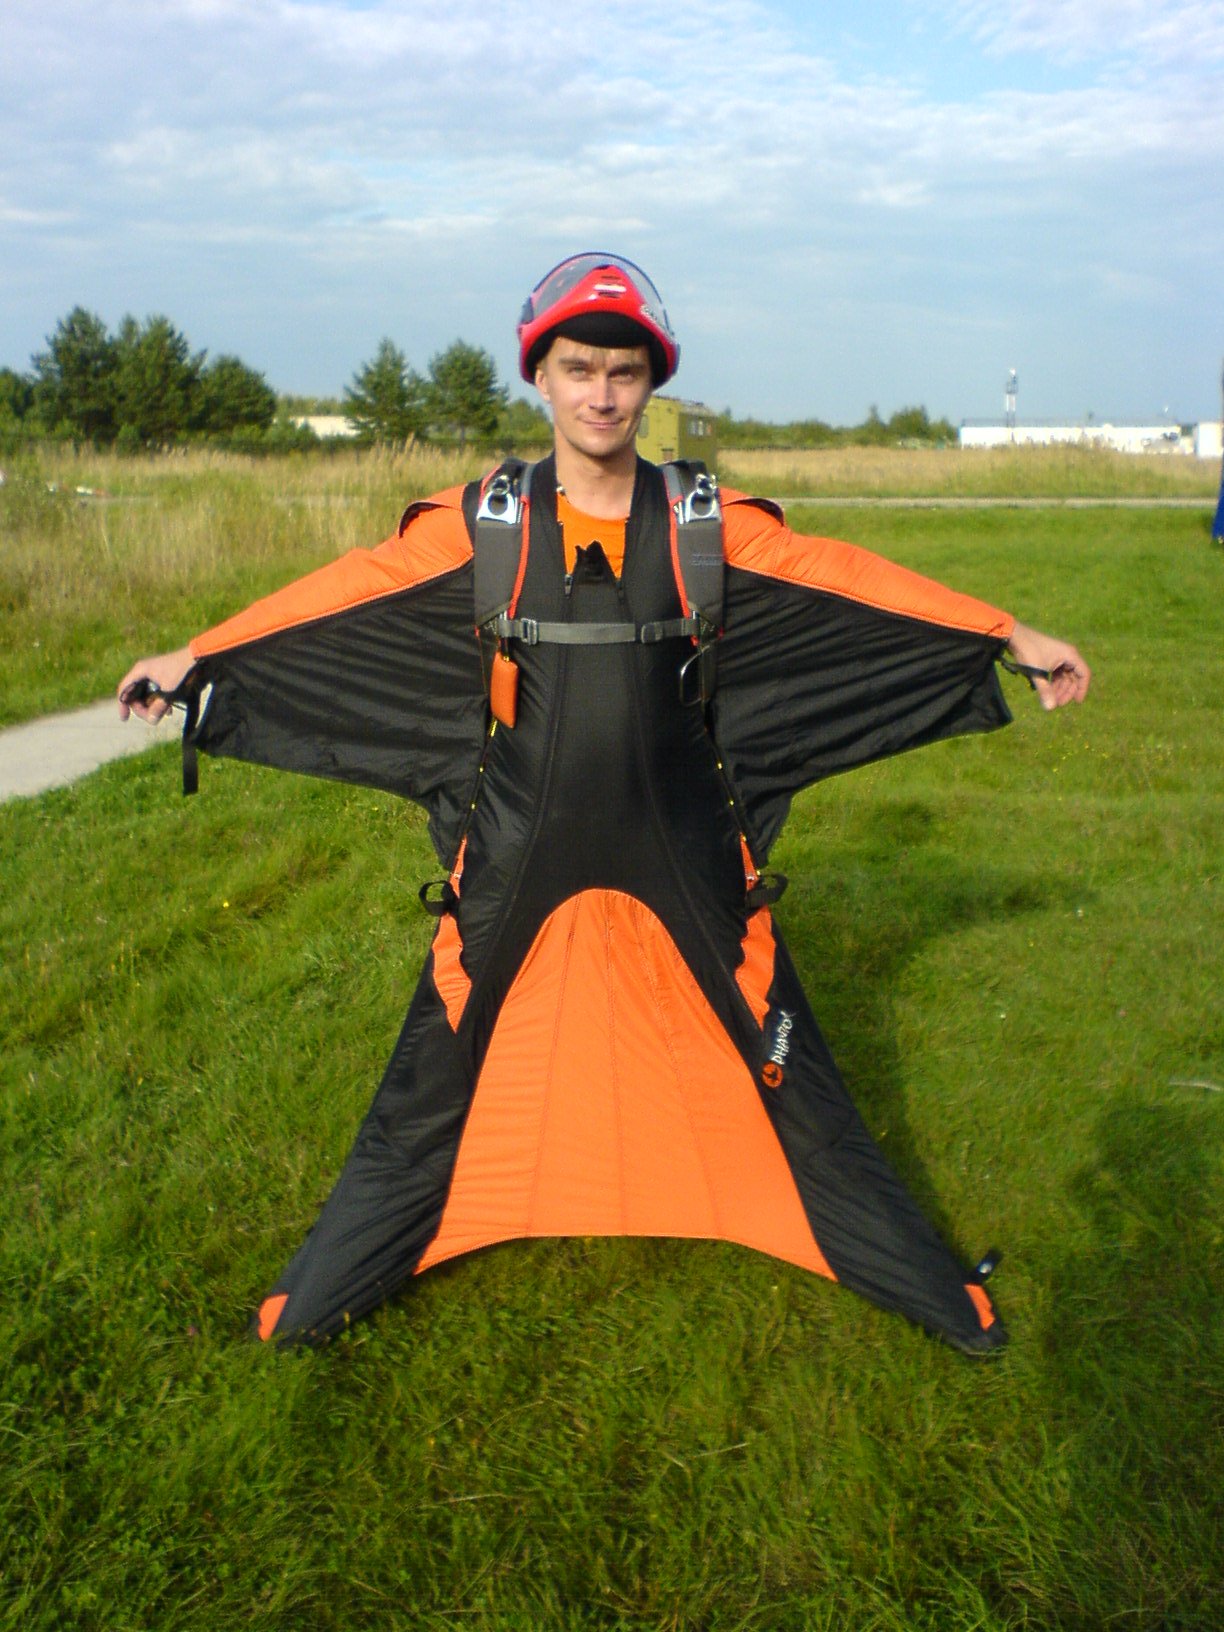 My first wingsuit jump